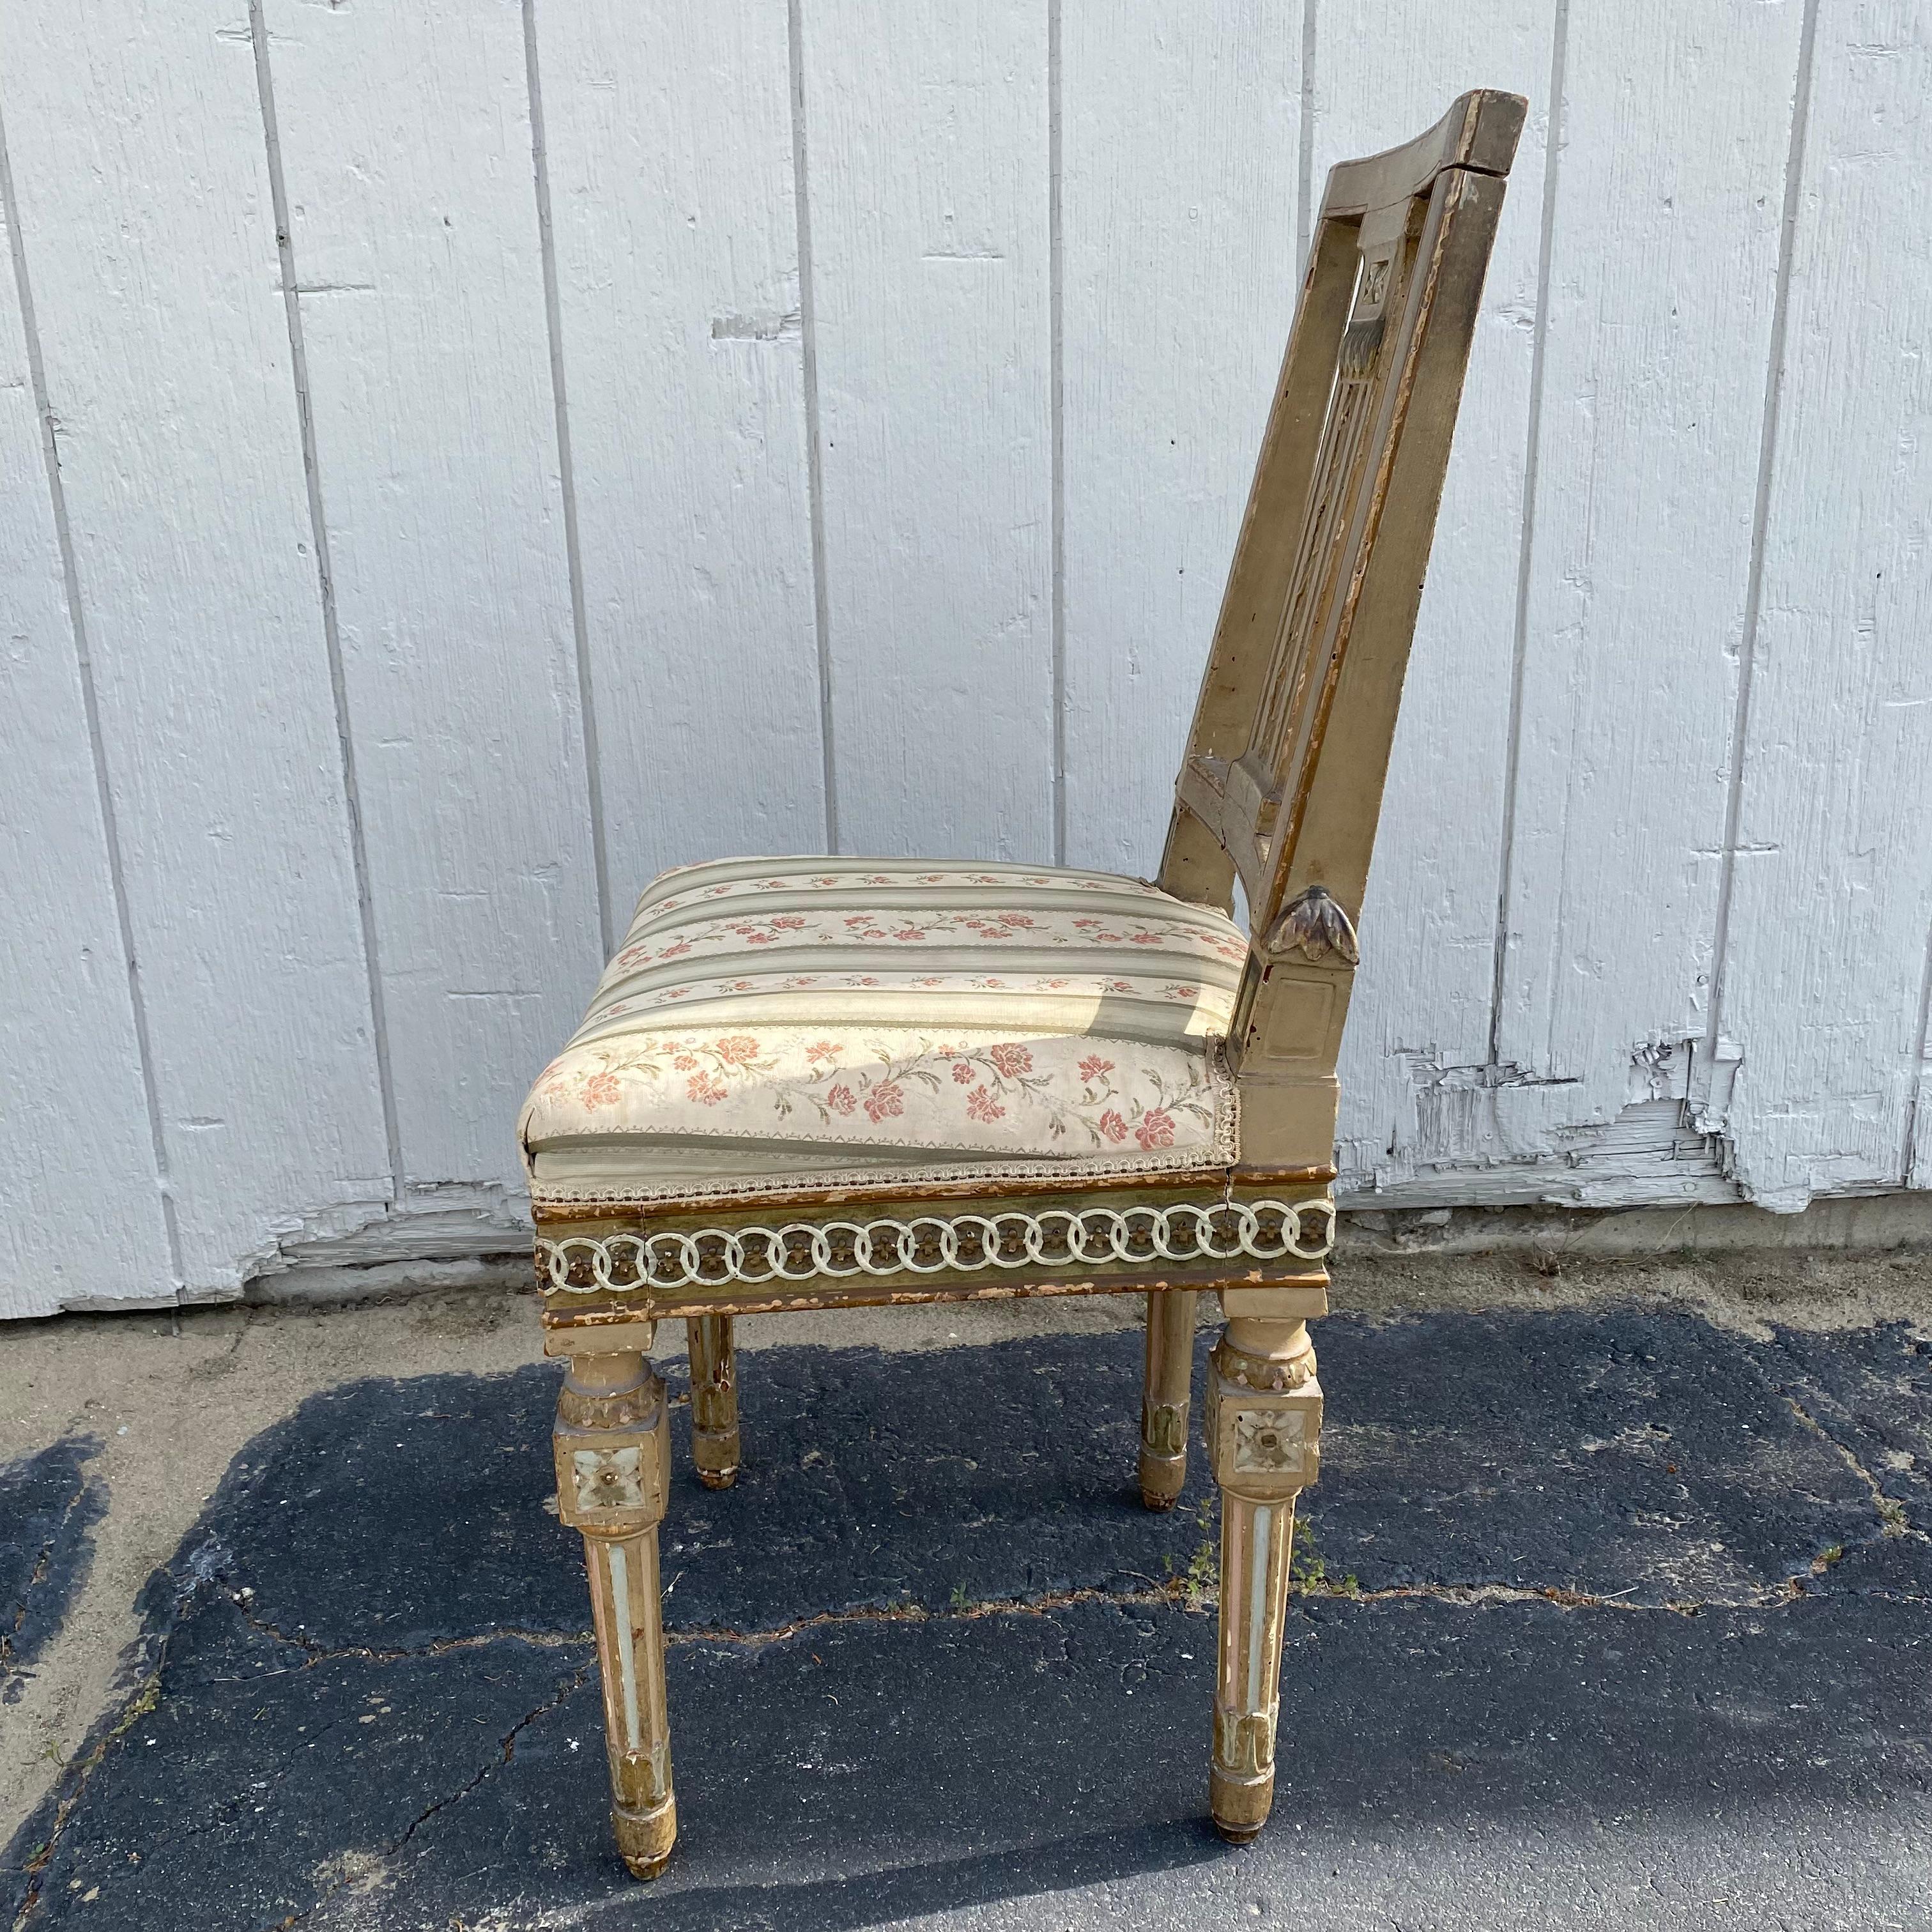 Really early set of period 18th century French neoclassical chairs with original paint and classic linked ring carving on the apron with floral embellishments at the top of each leg. It is rare to find a pair as early as these in such amazing shape.